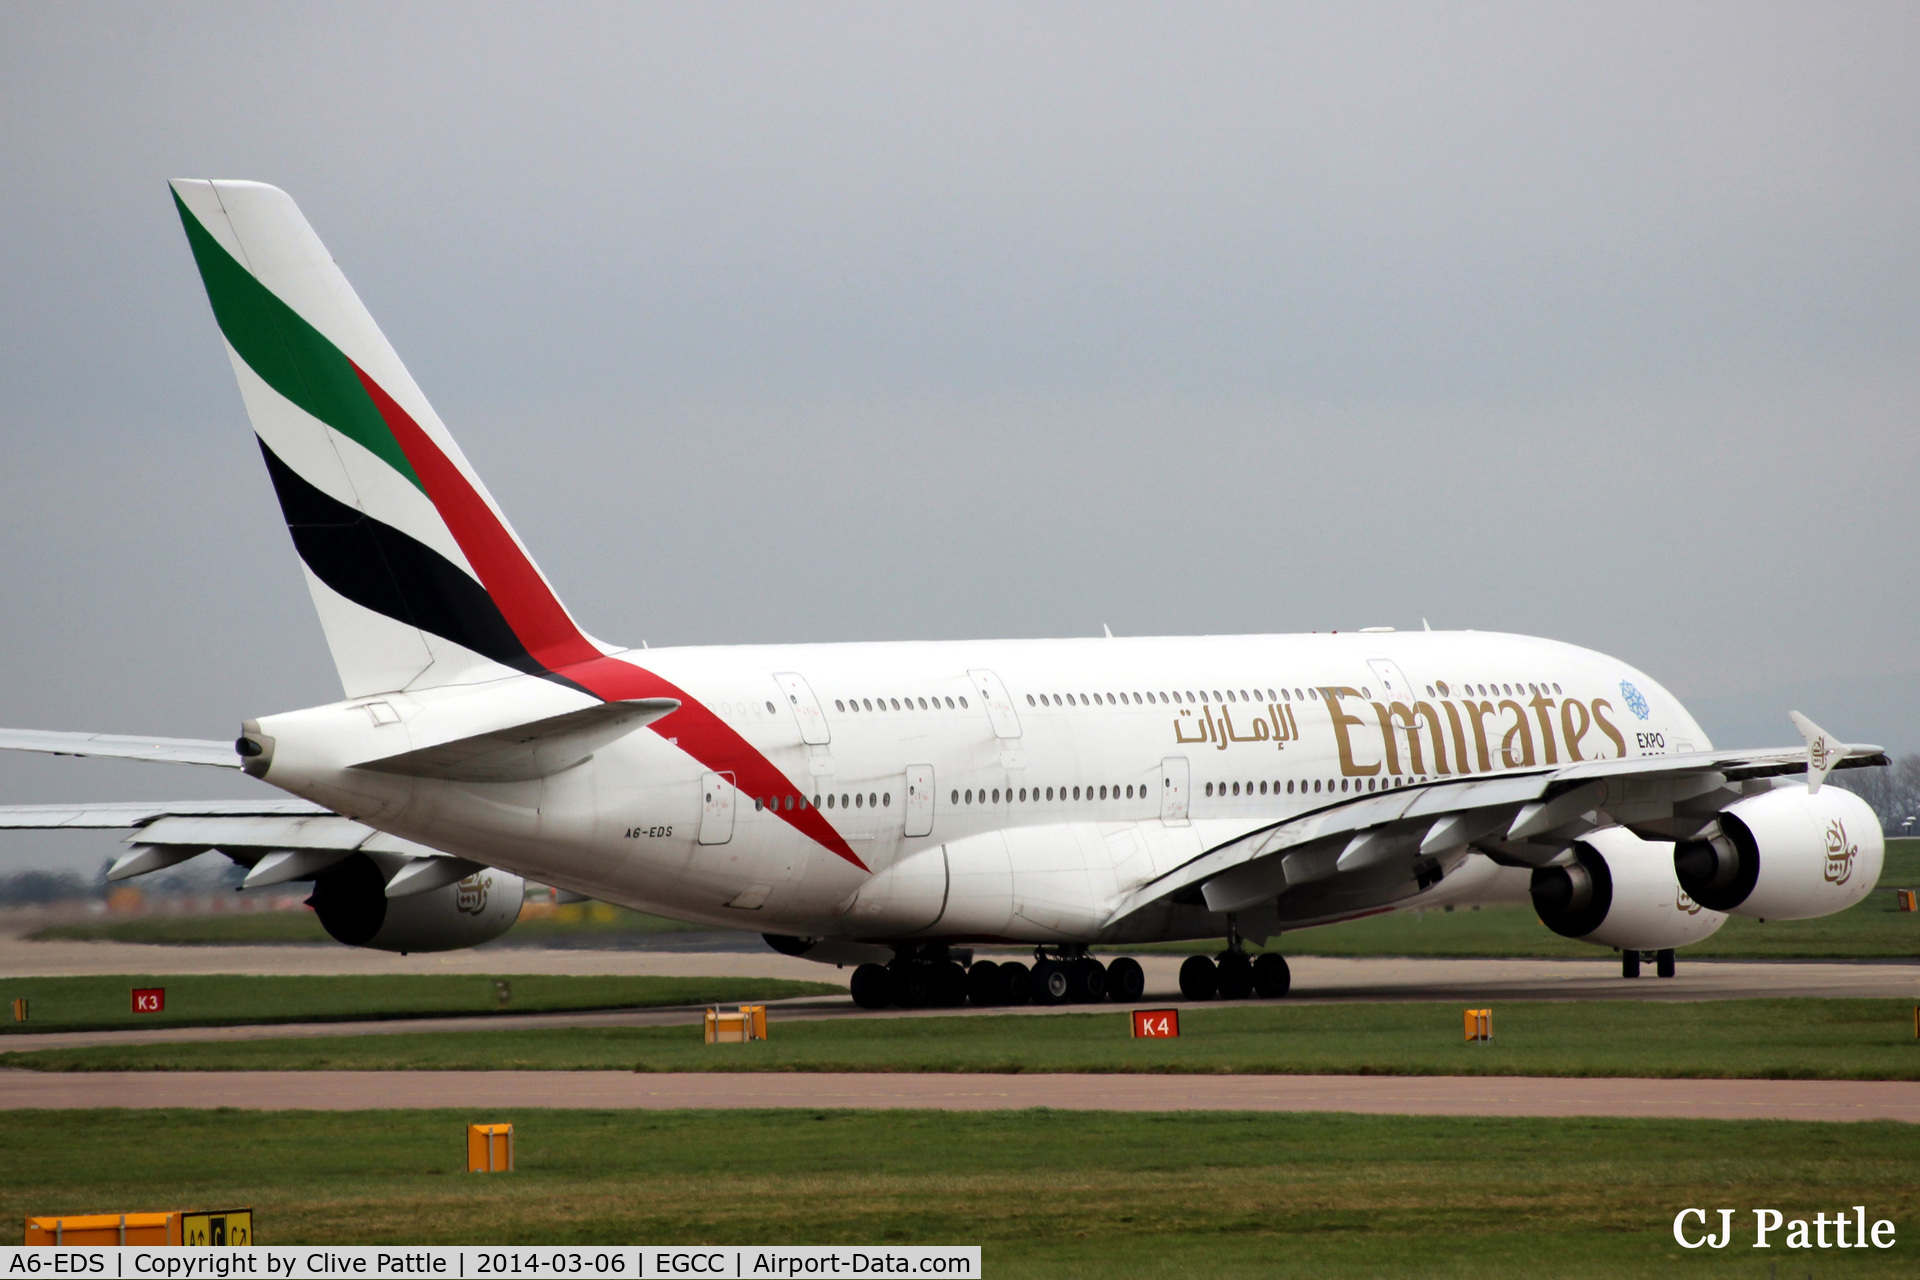 A6-EDS, 2011 Airbus A380-861 C/N 086, Taxy for departure at Manchester EGCC